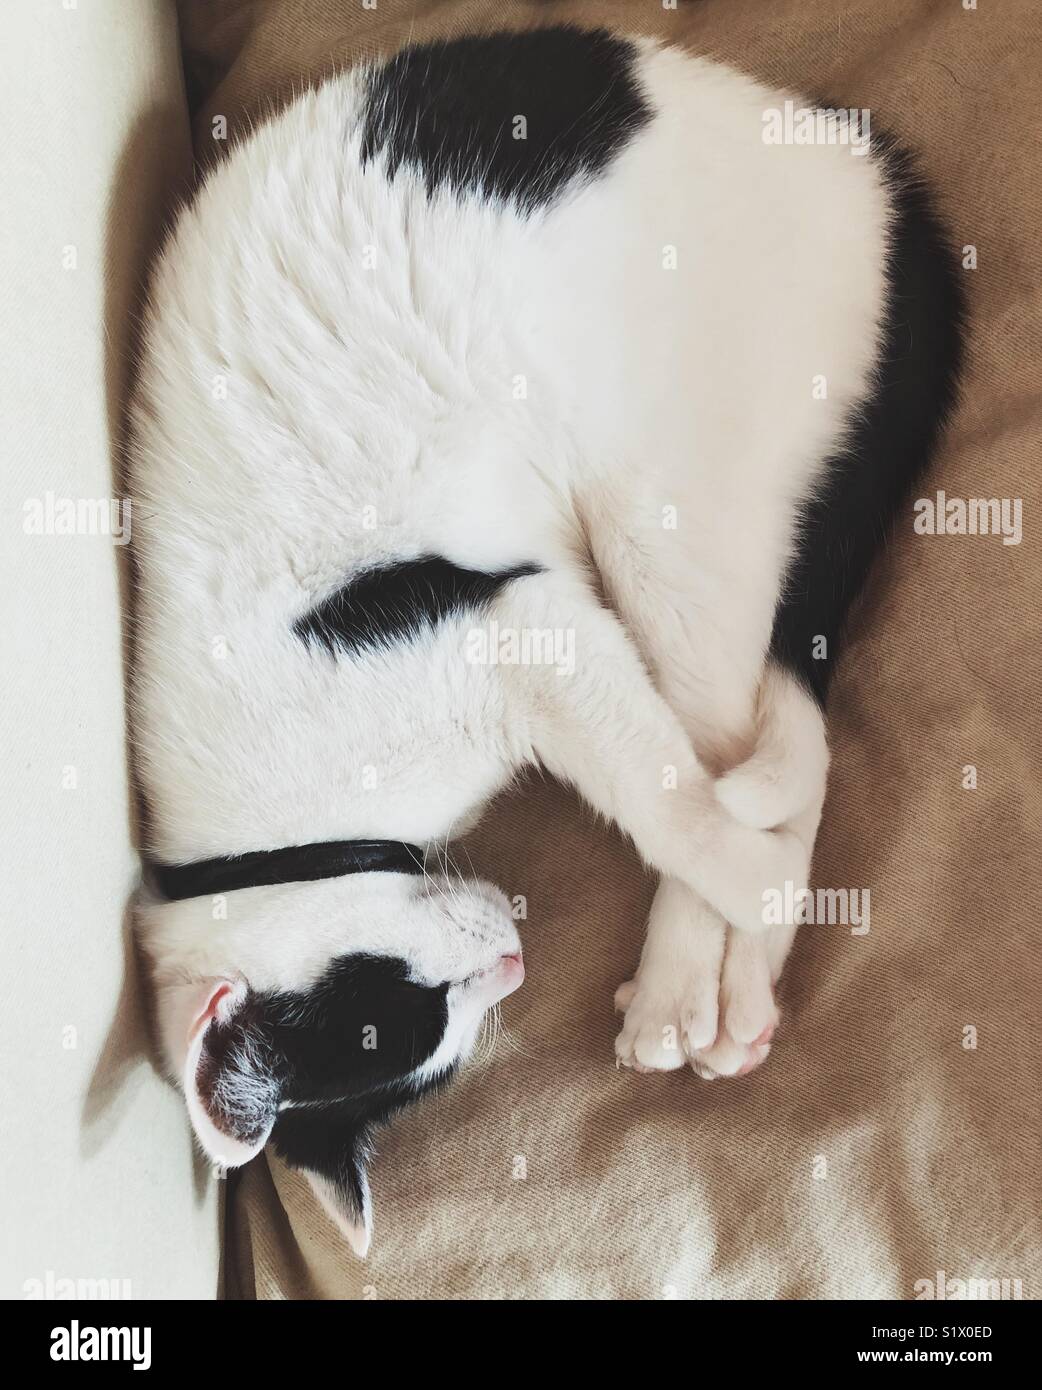 White cat with black spots and black collar curled up with front paws and tail wrapped around hind legs while sleeping Stock Photo